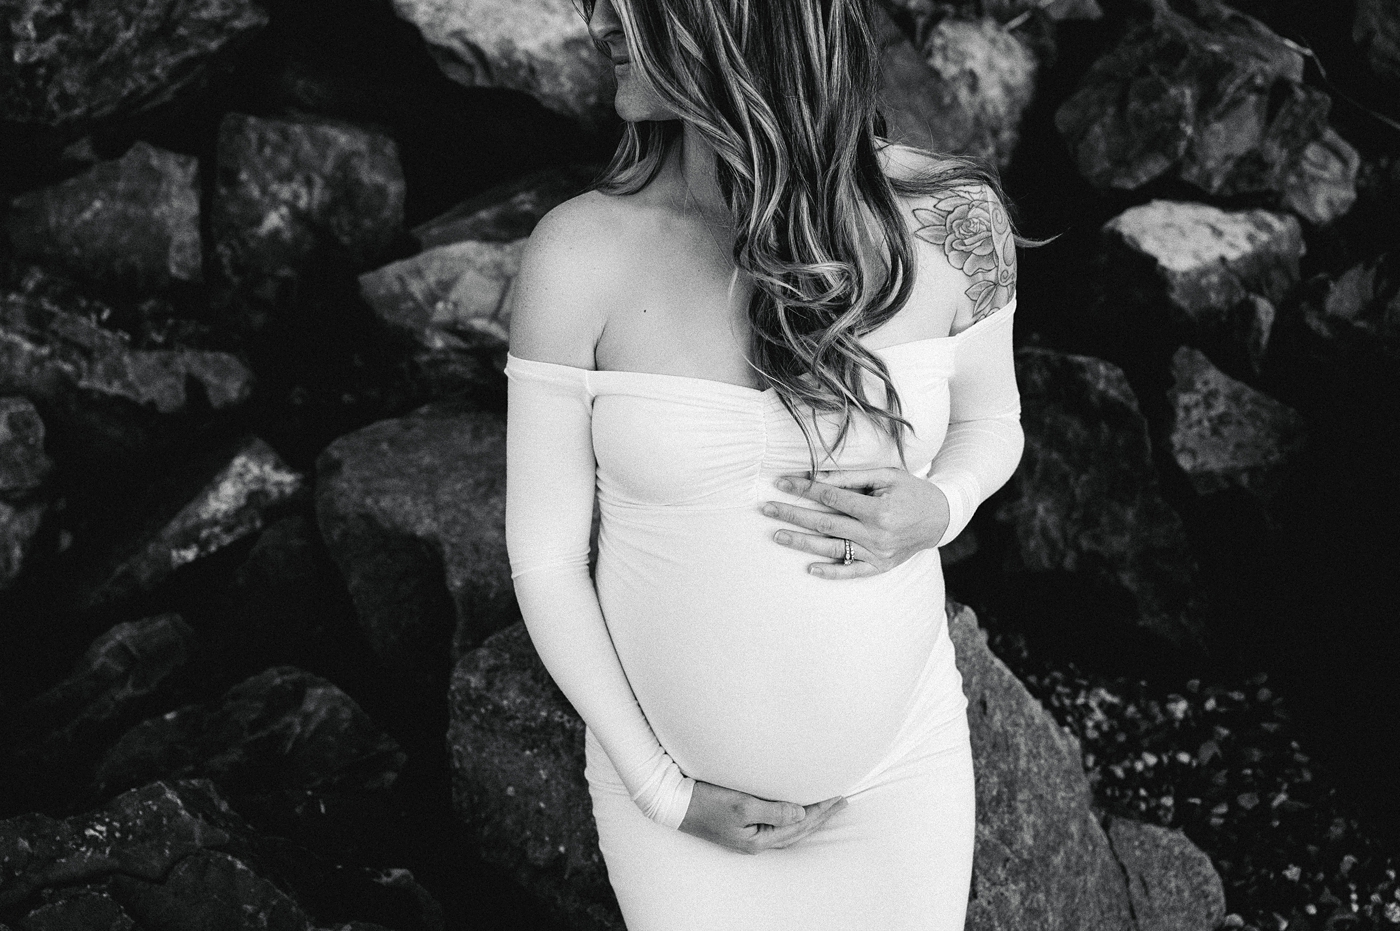 Mom to be embraces pregnant belly. Image by PNW maternity photographer Meg Newton.